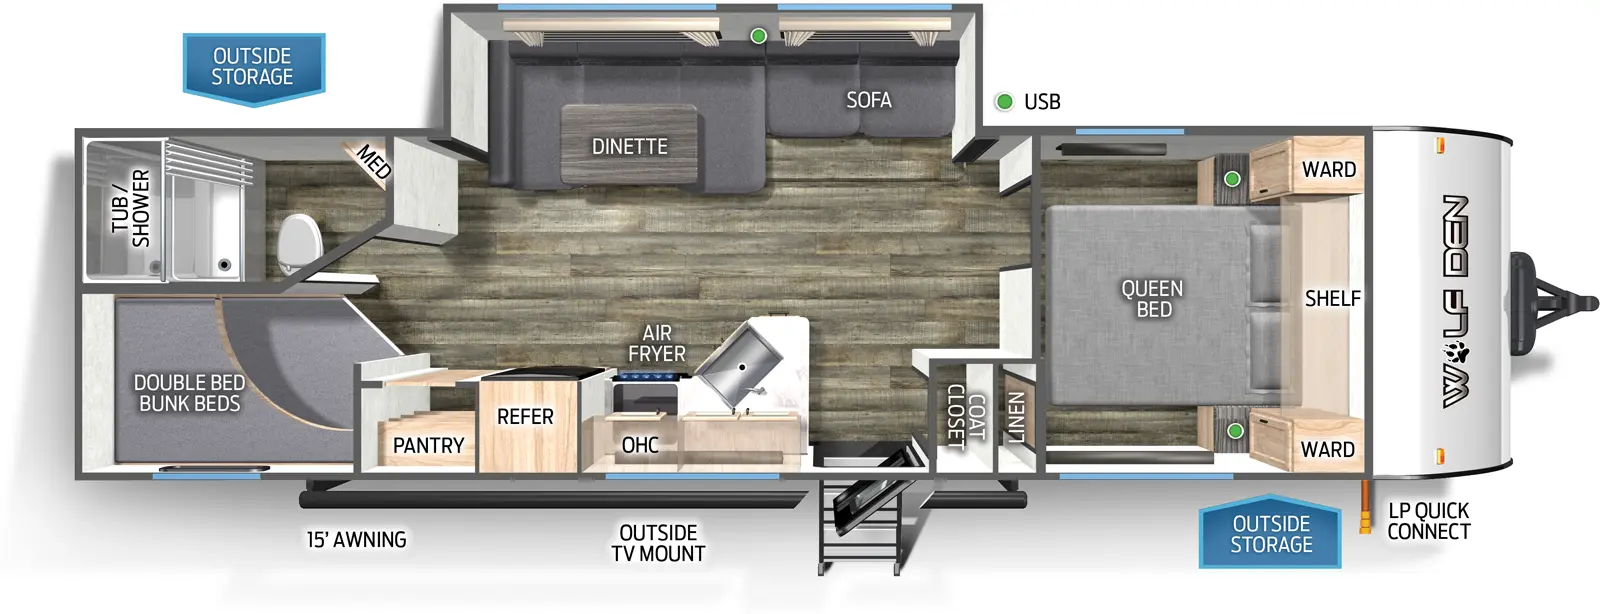 The 262DBH has one slideout and one entry. Exterior features LP quick connect, outside storage, outside TV mount, and 15 foot awning. Interior layout front to back: foot-facing queen bed with shelf above, wardrobes on each side, and linen closet; off-door side slideout with sofa and u-dinette; door side coat closet, entry, peninsula kitchen counter with sink that wraps to door side with overhead cabinet, air fryer, refrigerator, and pantry; rear off-door side full bathroom with medicine cabinet; rear door side double bed bunk beds.